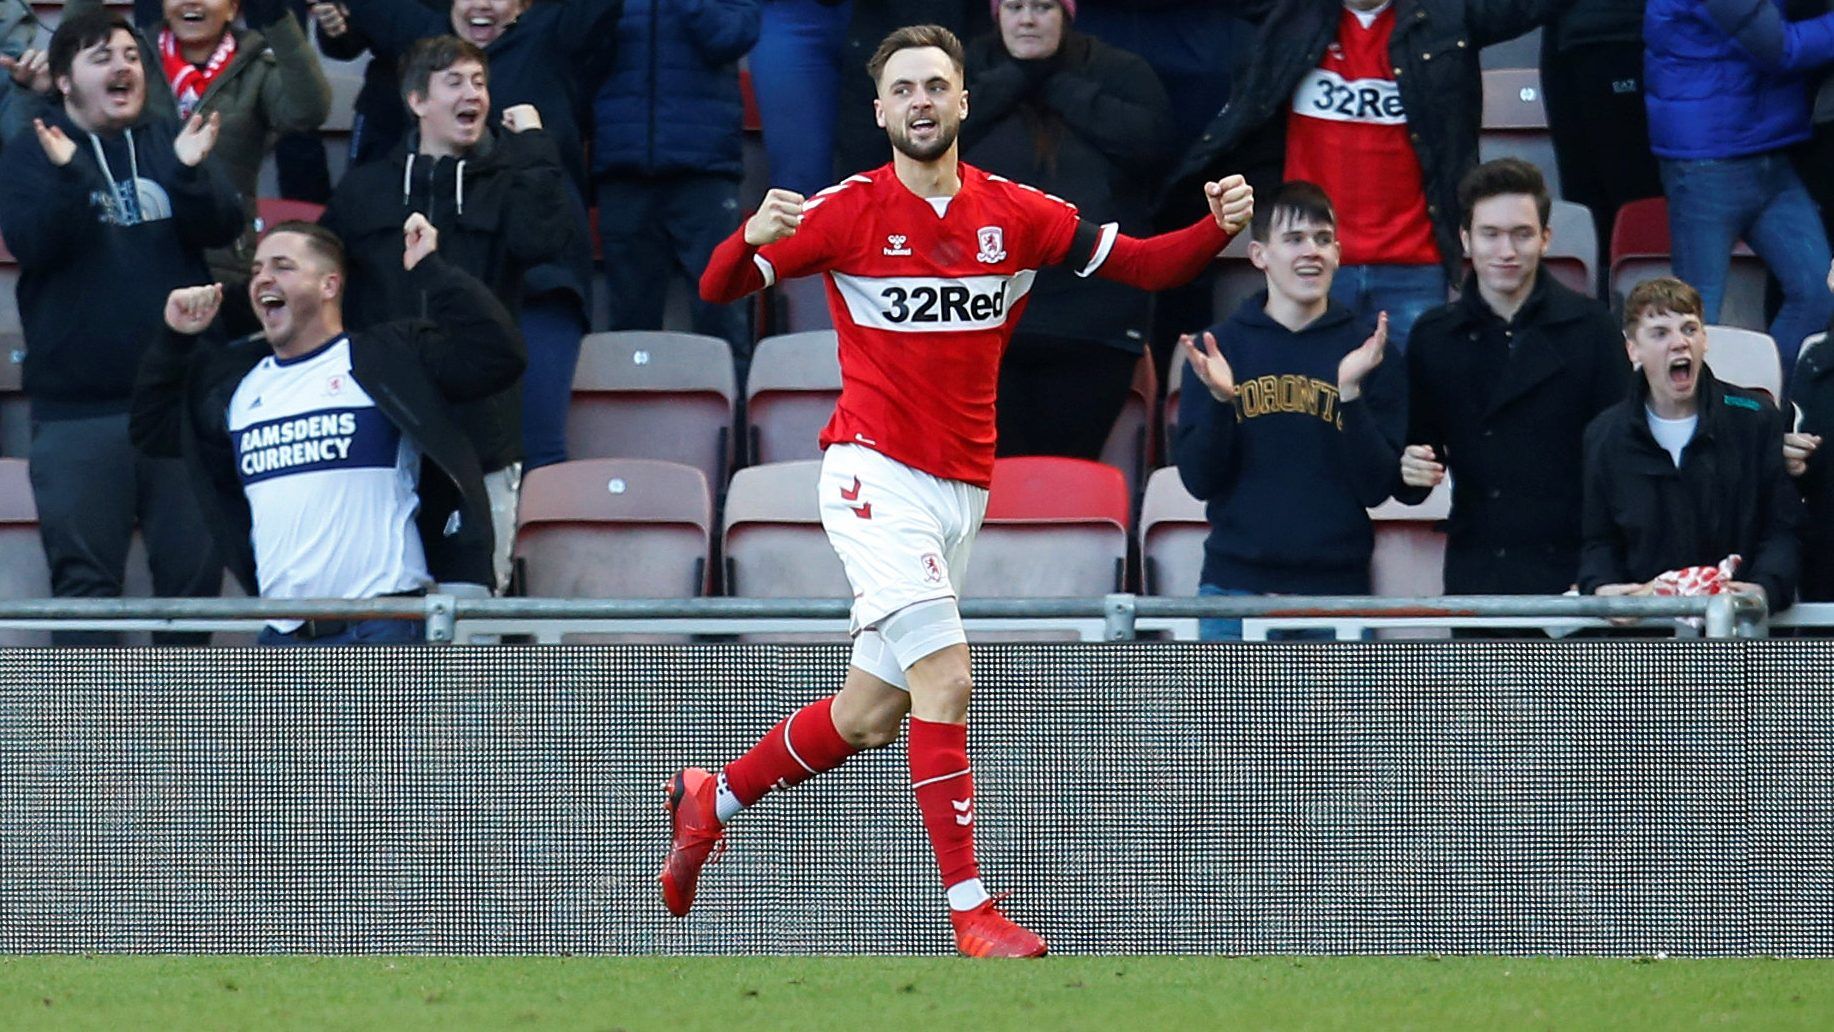 Soccer Football - Championship - Middlesbrough v Leeds United - Riverside Stadium, Middlesbrough, Britain - February 9, 2019  Middlesbrough's Lewis Wing celebrates scoring their first goal     Action Images/Ed Sykes  EDITORIAL USE ONLY. No use with unauthorized audio, video, data, fixture lists, club/league logos or 